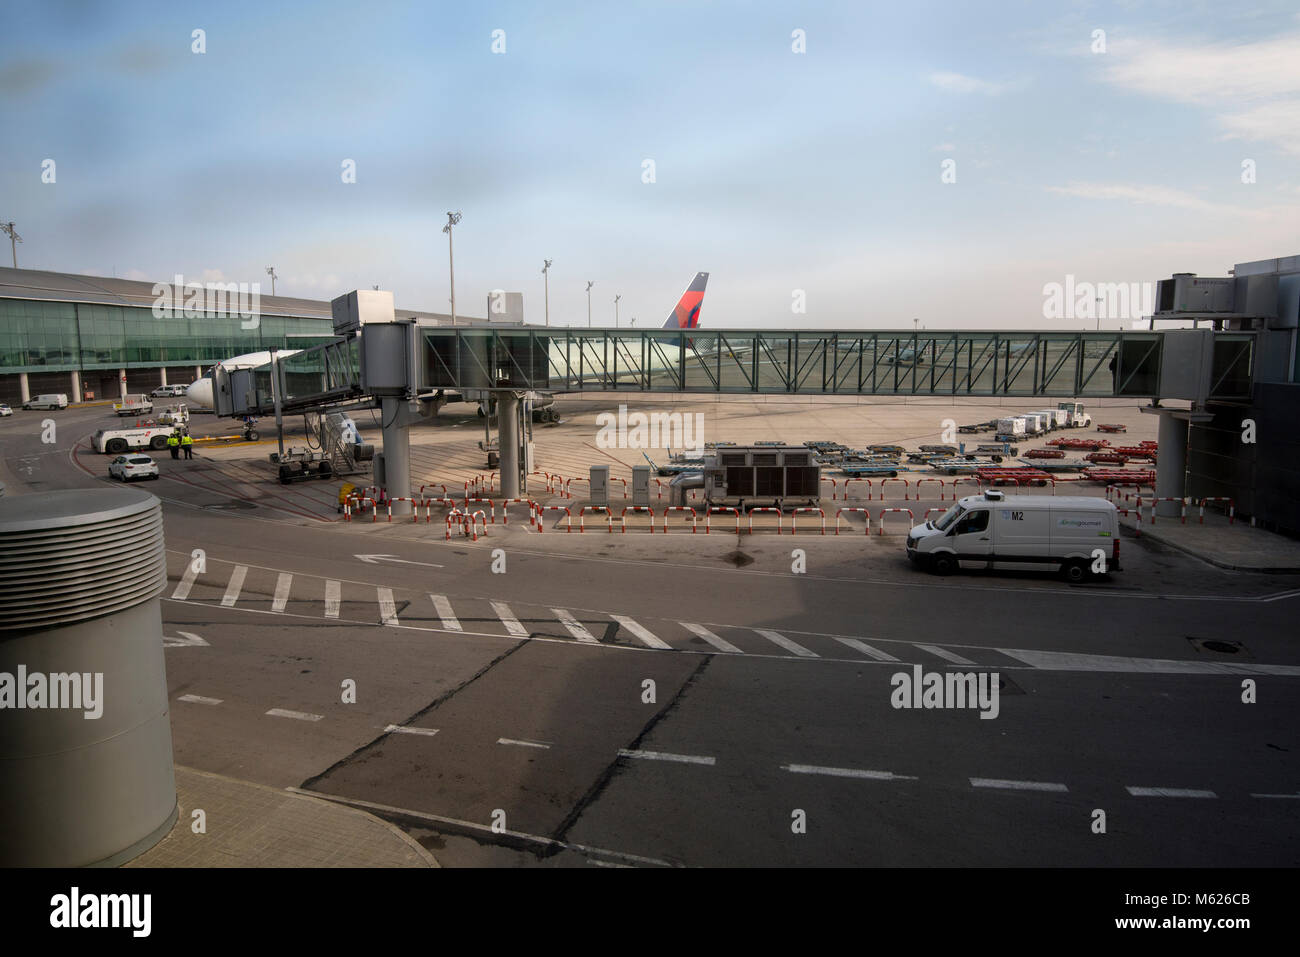 Looking out to airside at Barcelona airport Stock Photo